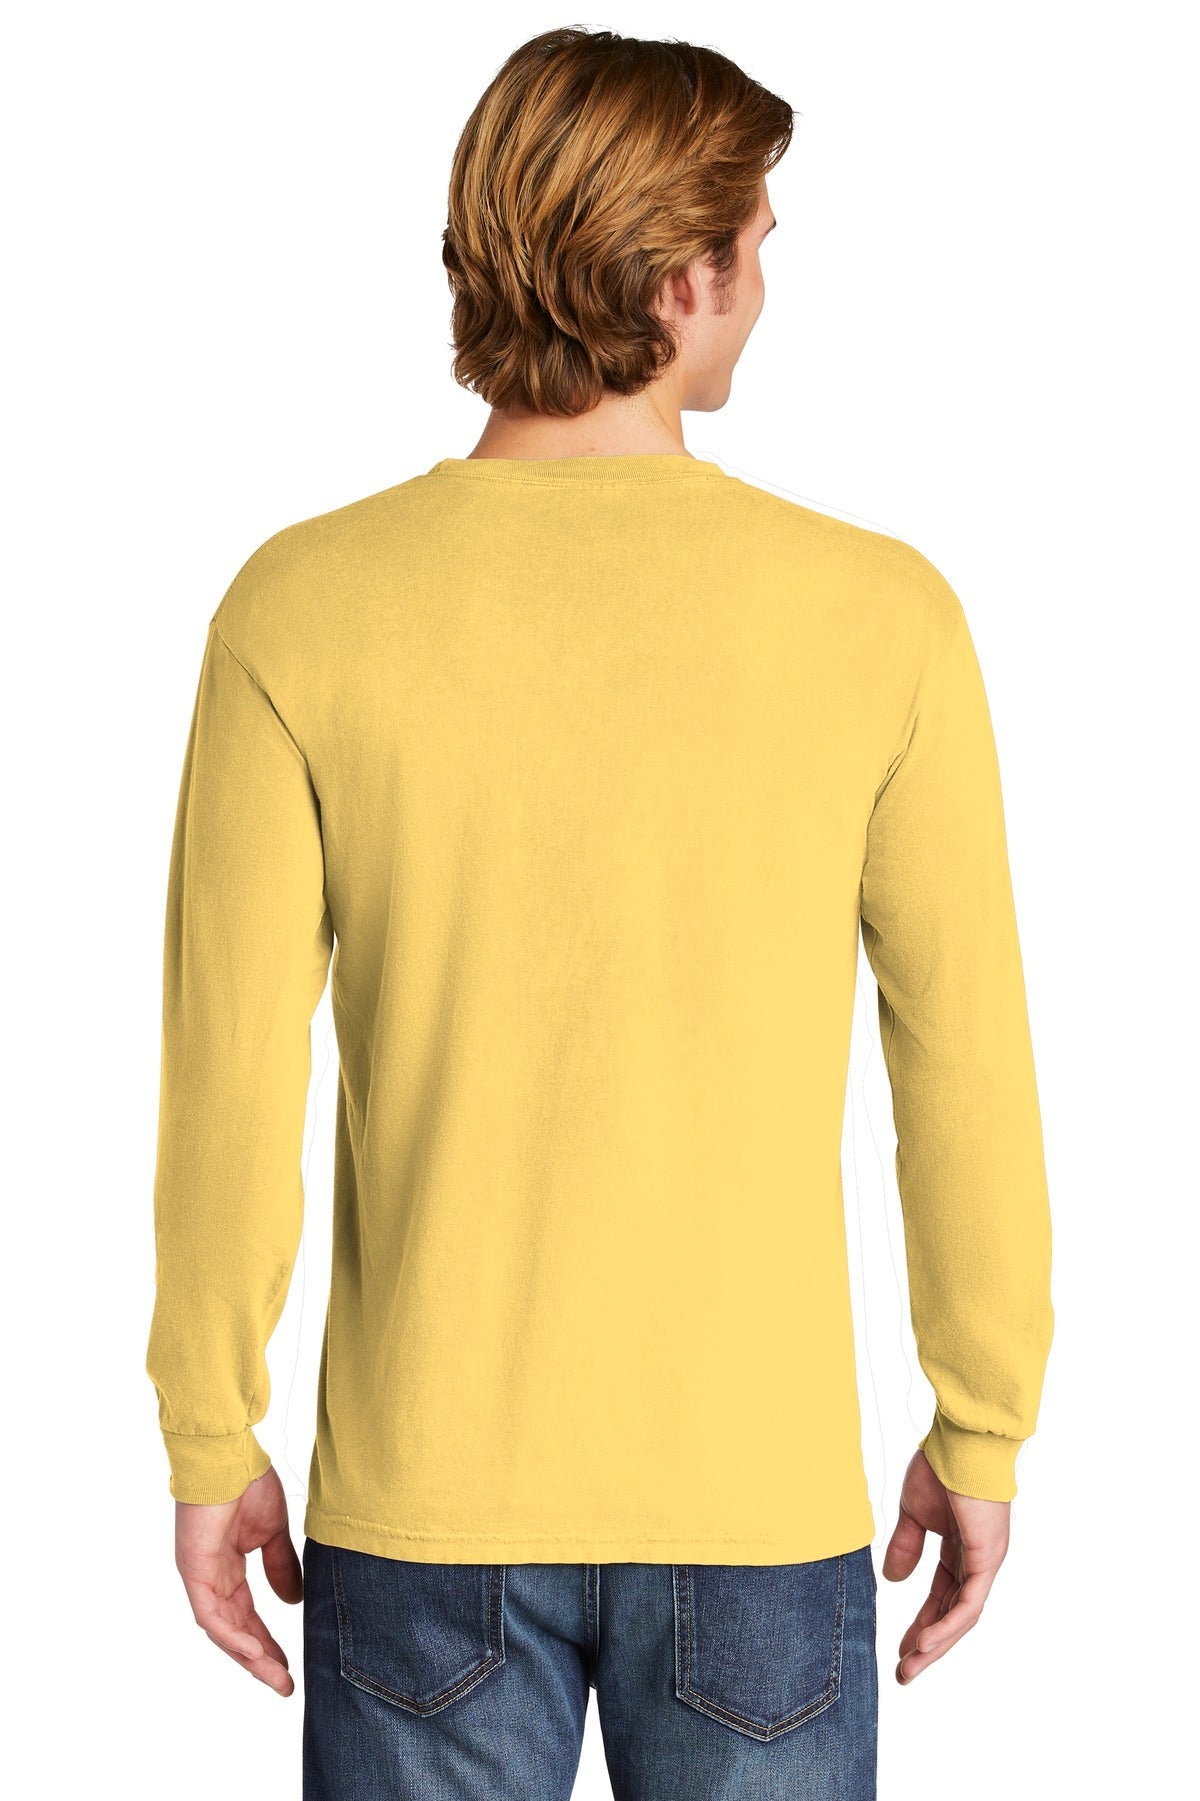 COMFORT COLORS ® Heavyweight Ring Spun Long Sleeve Tee. 6014 [Butter] - DFW Impression